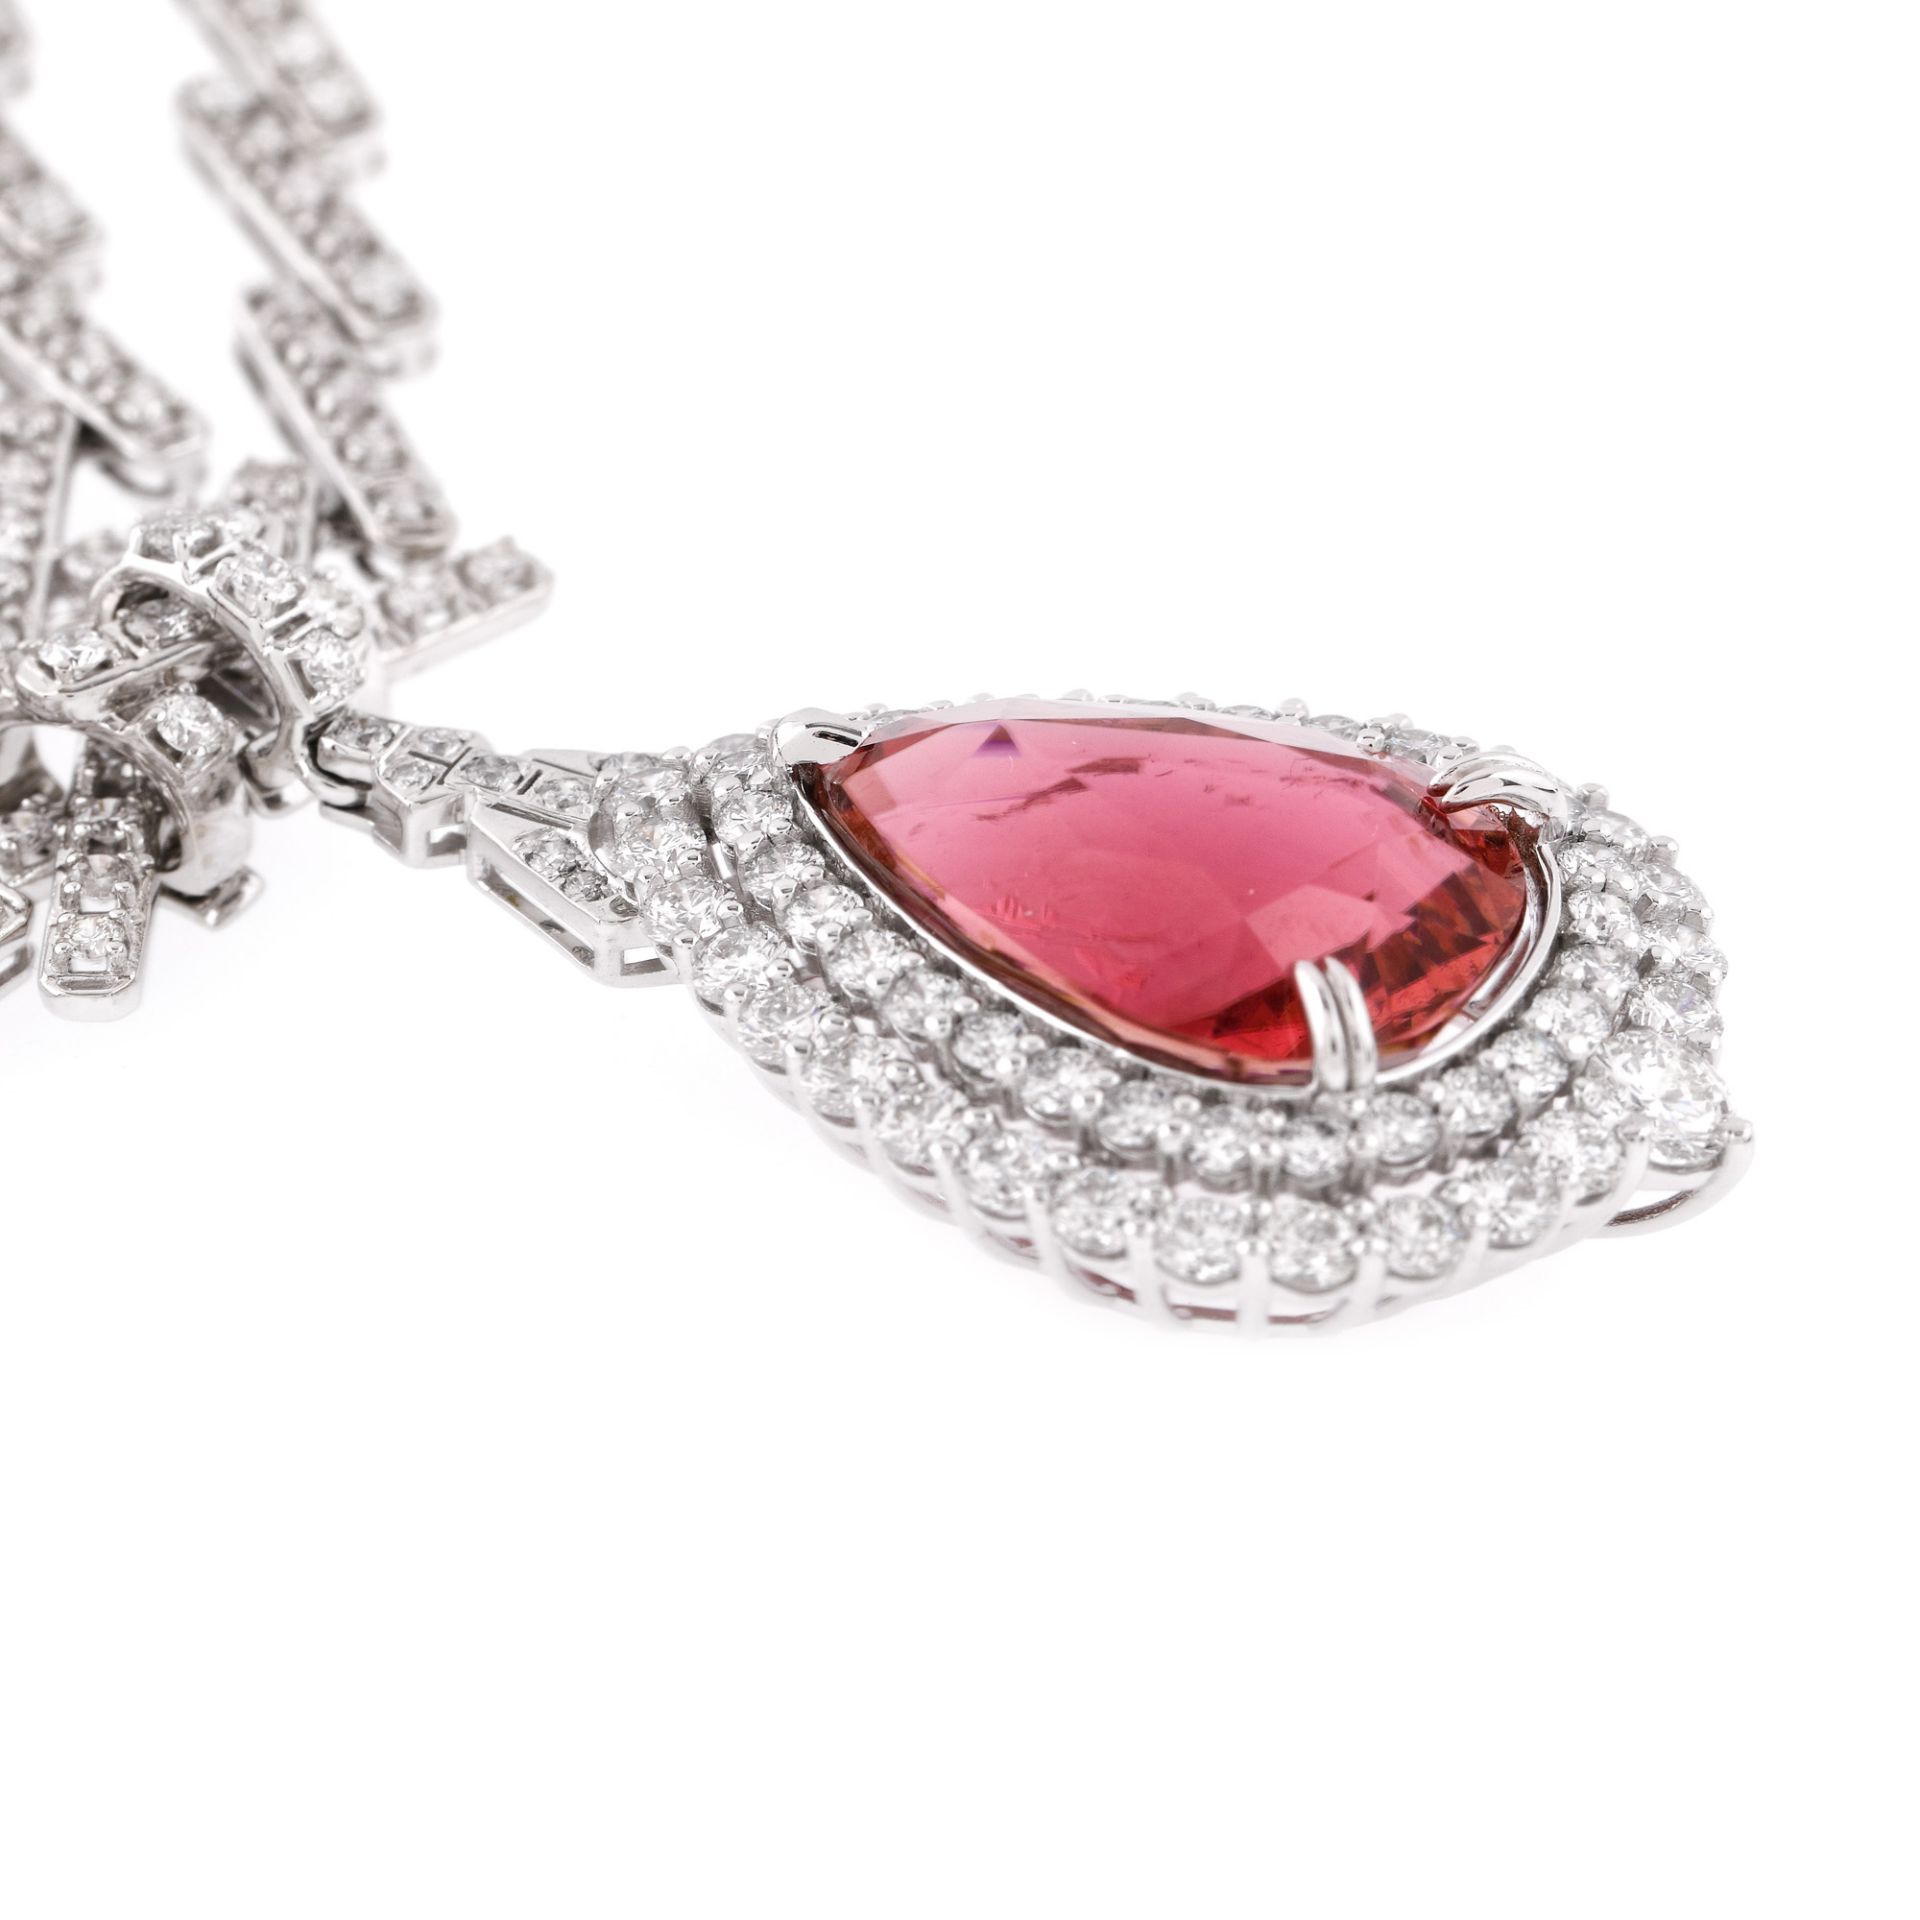 Convertible white gold pendant necklace, five ways to wear, decorated with diamonds and pink tourmal - Image 3 of 4